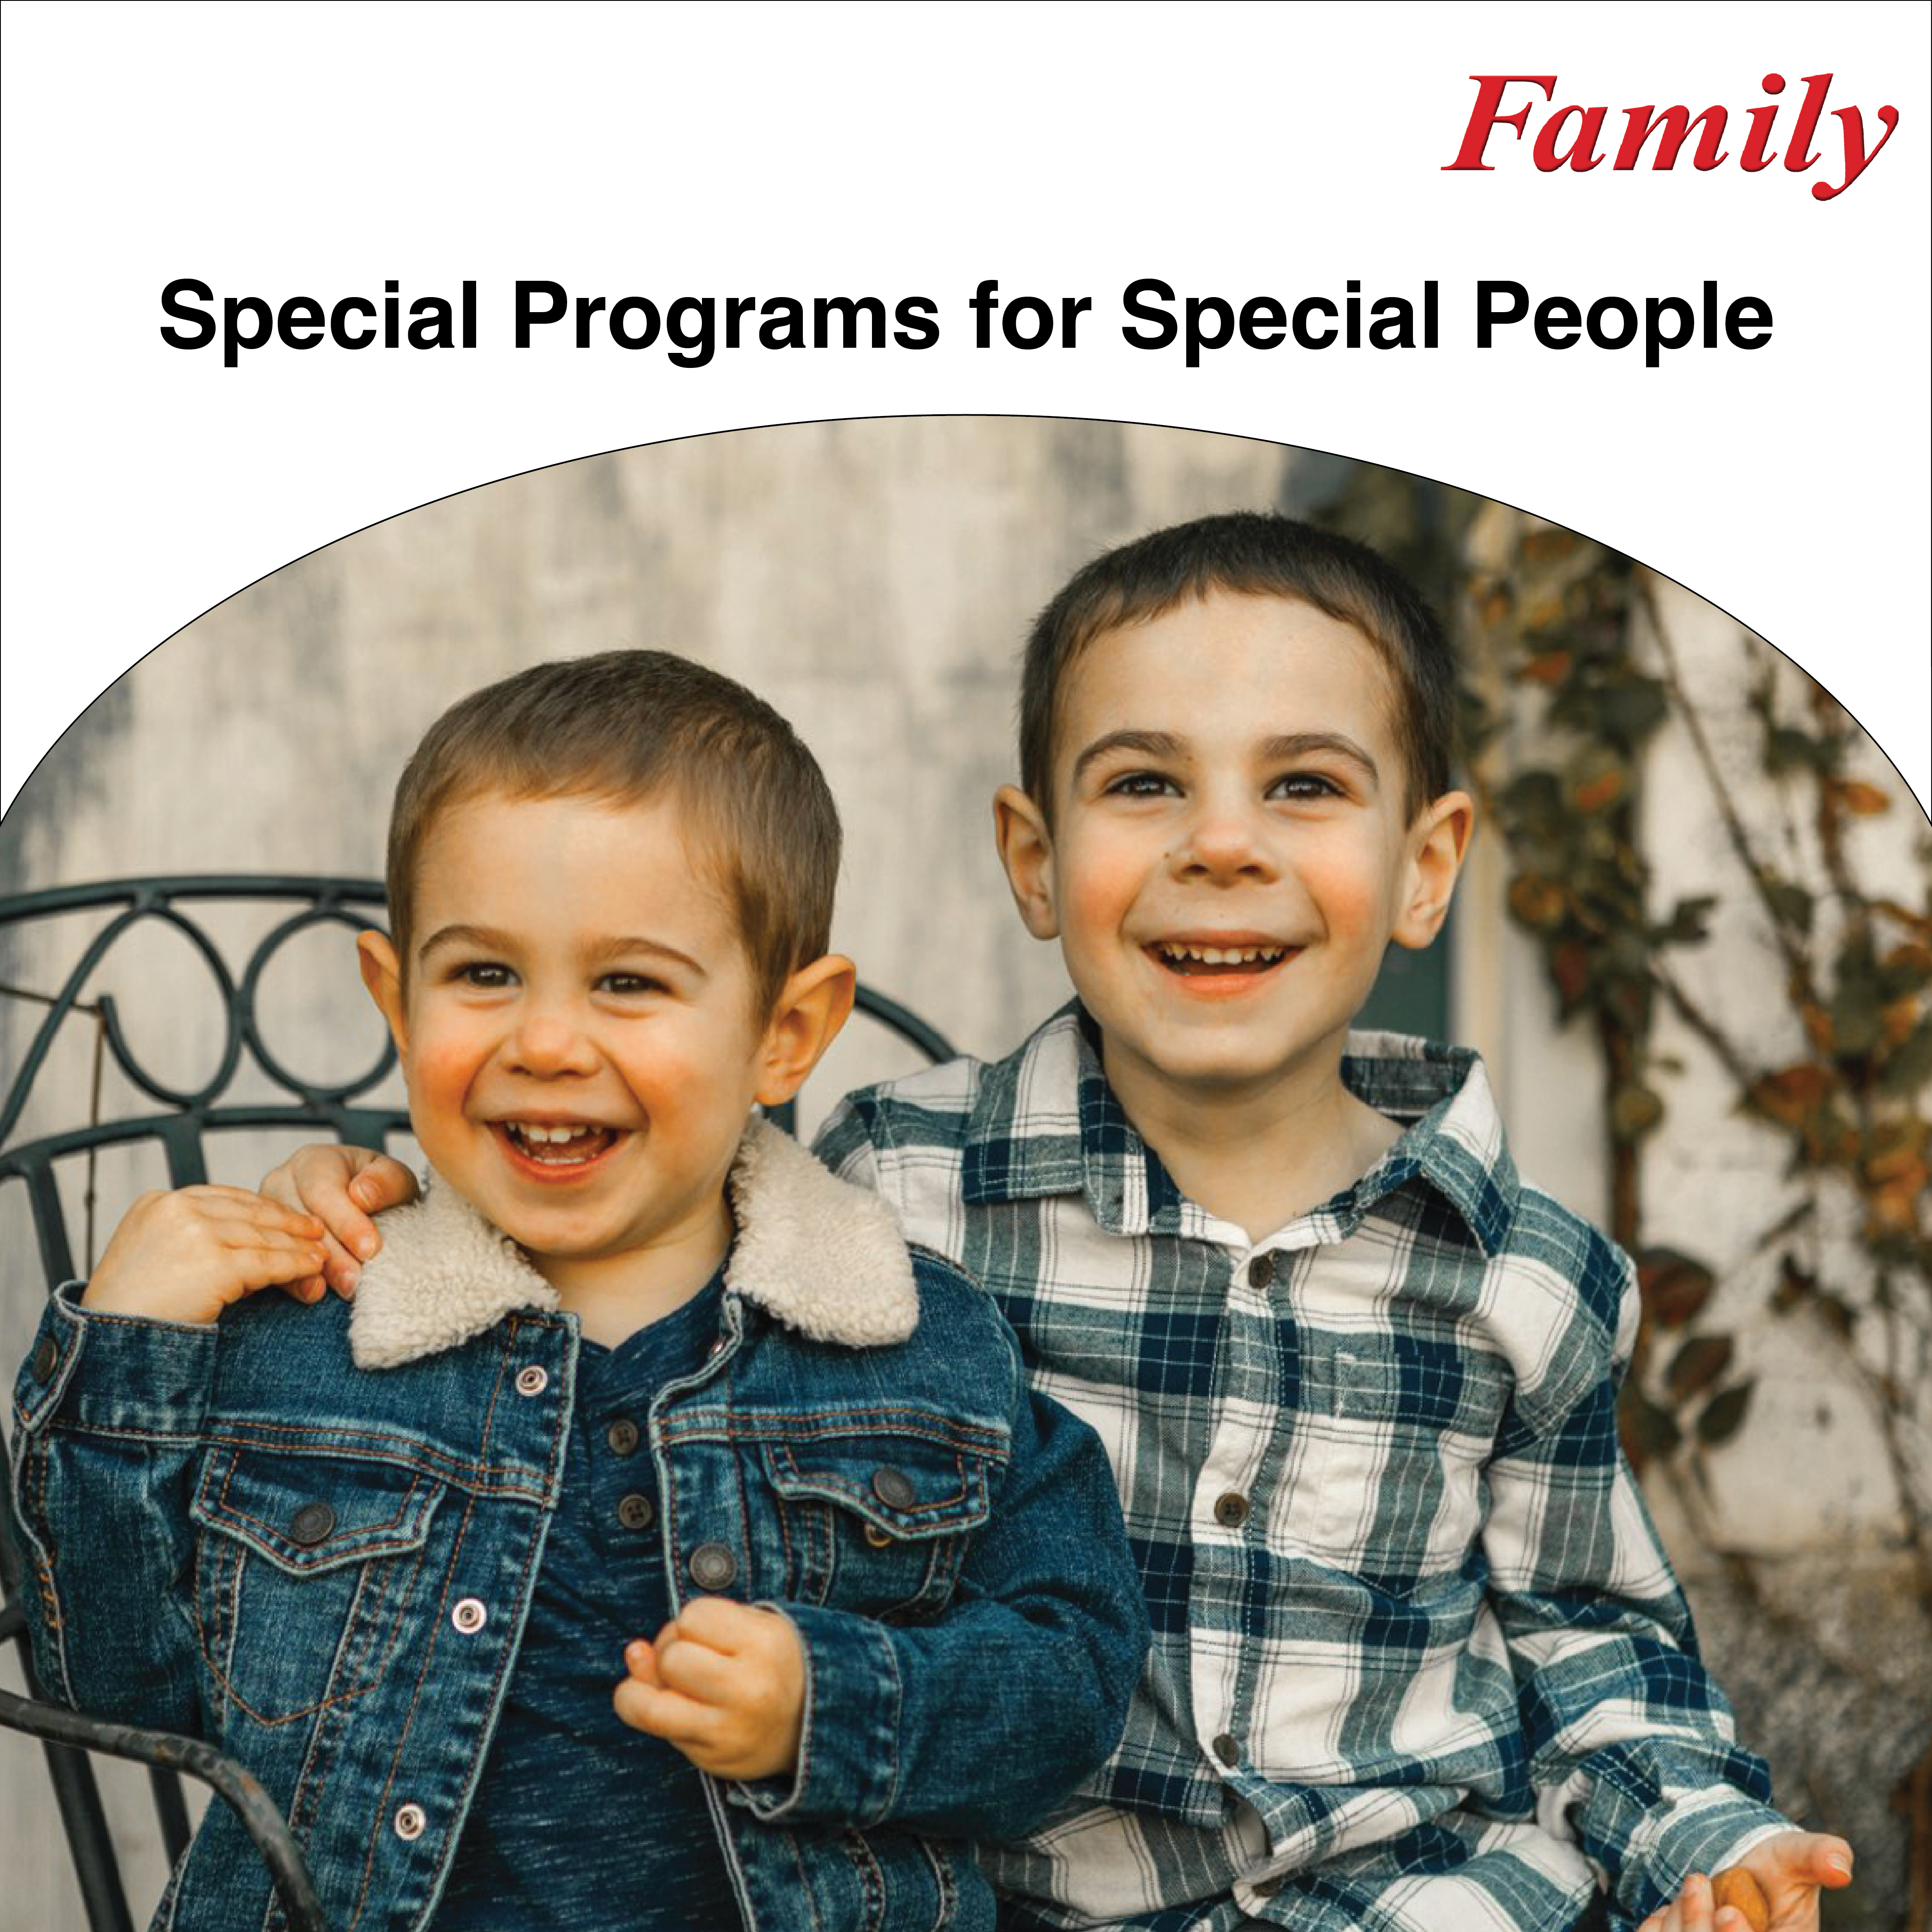 Special Programs for Special People